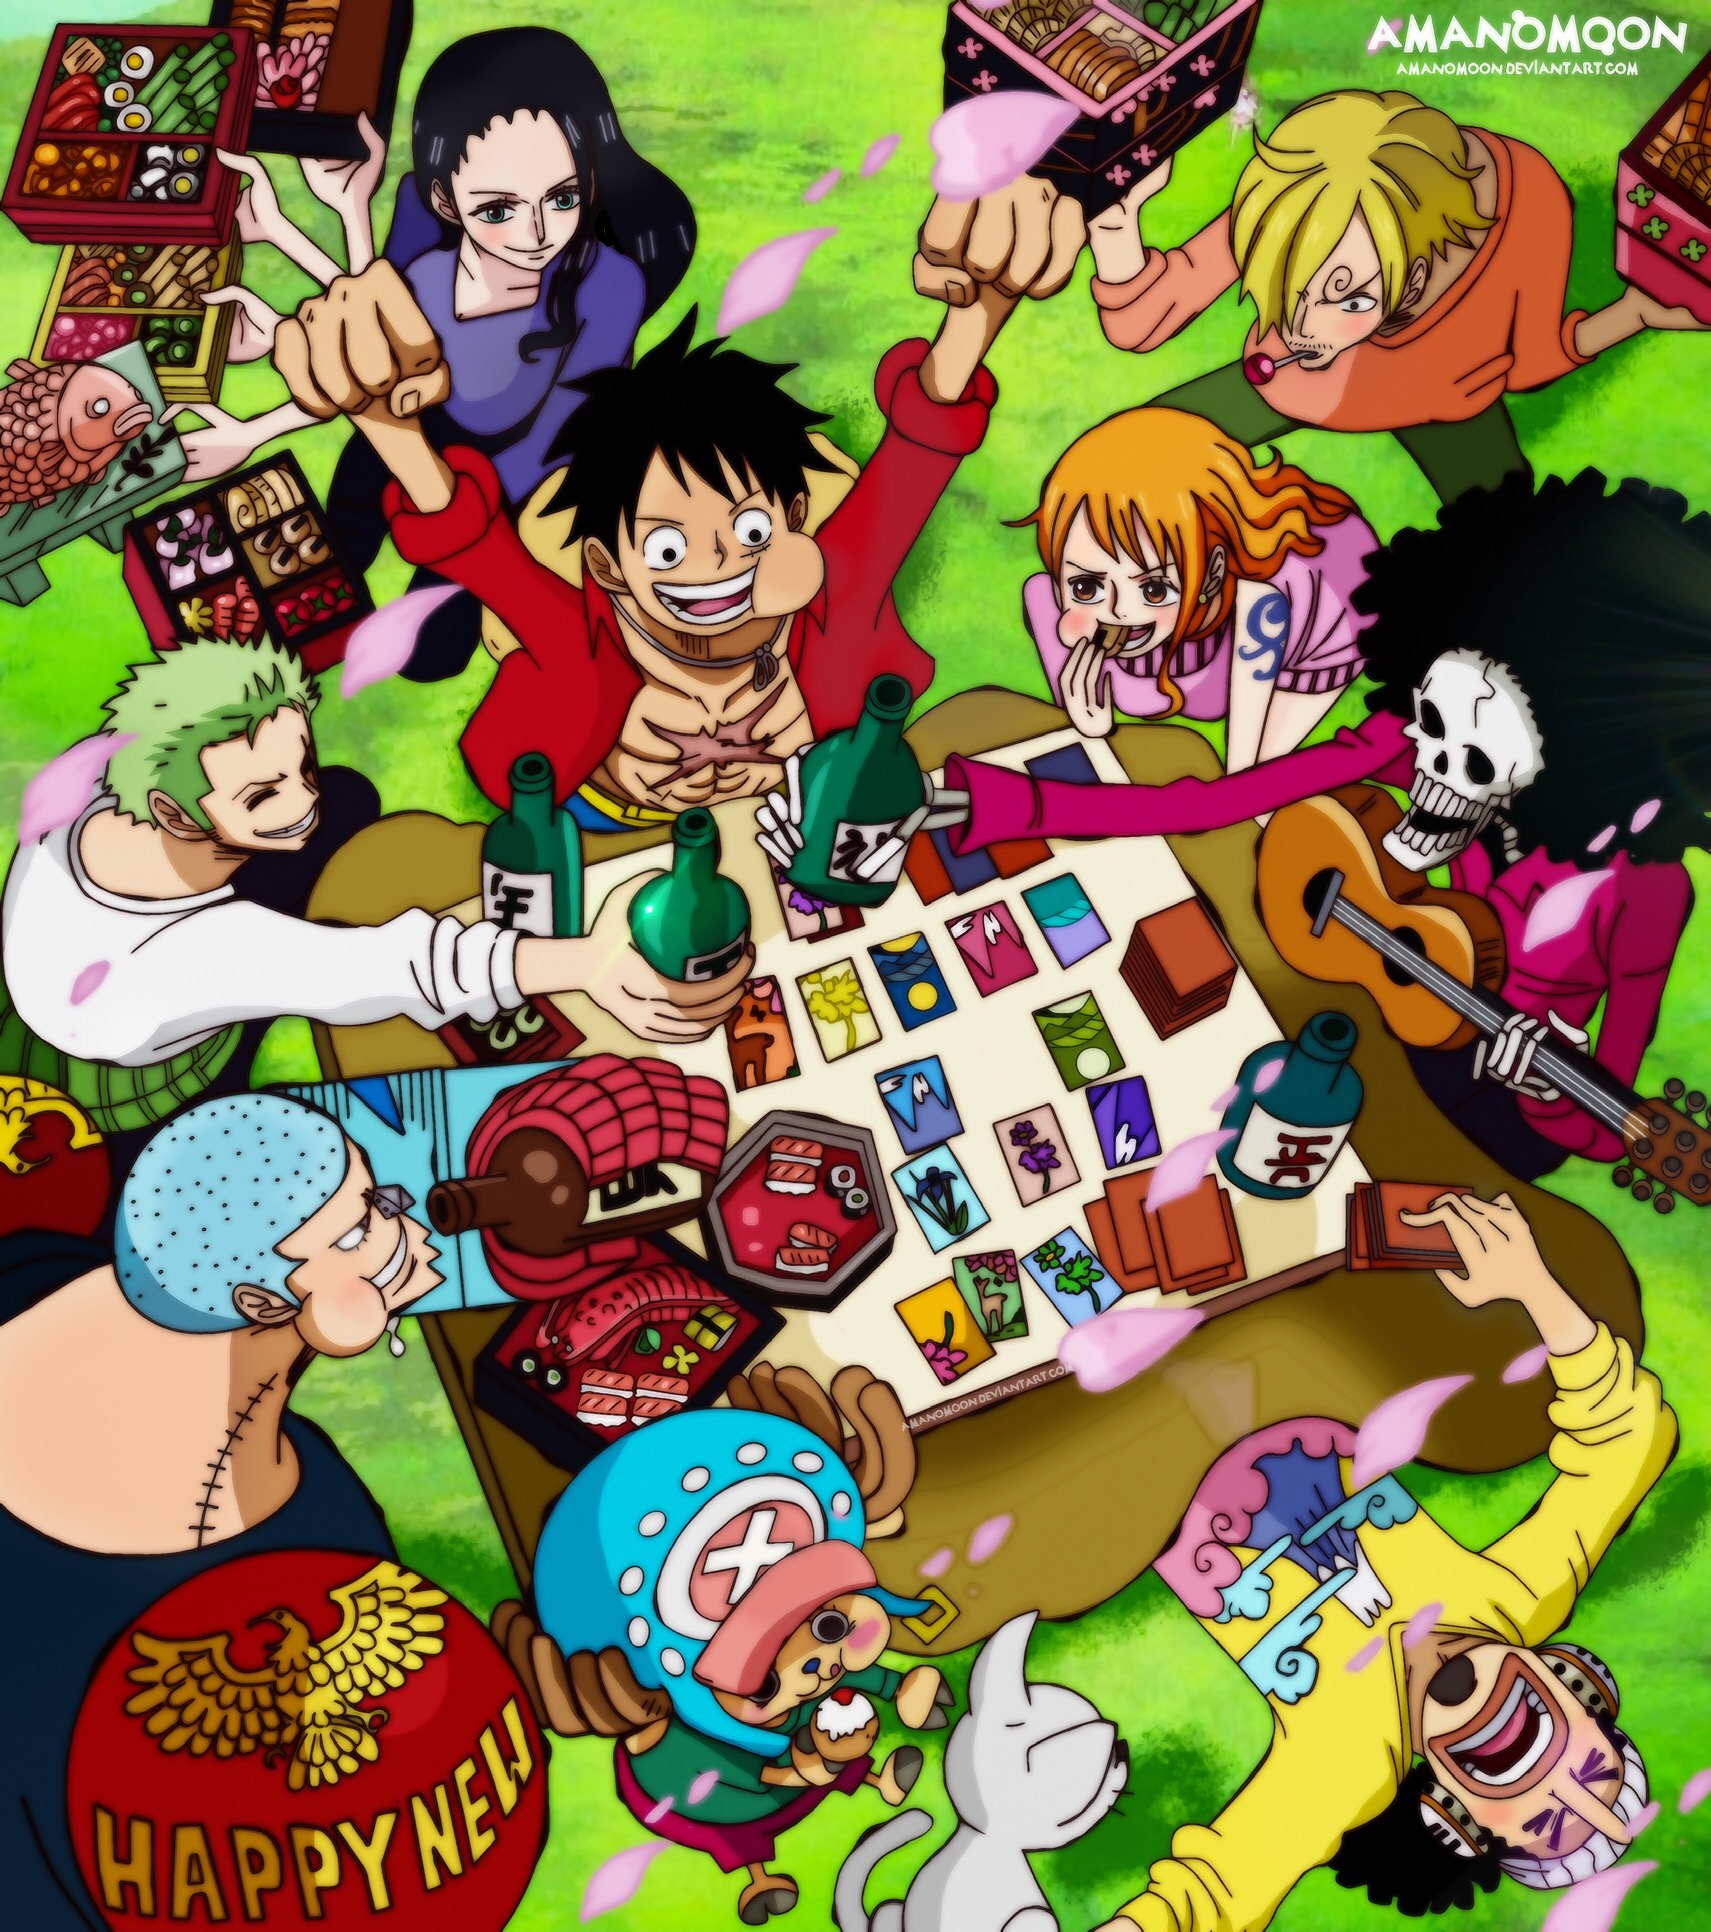 One Piece Straw Hat Pirates Anime Style Artwork by Amanomoon on